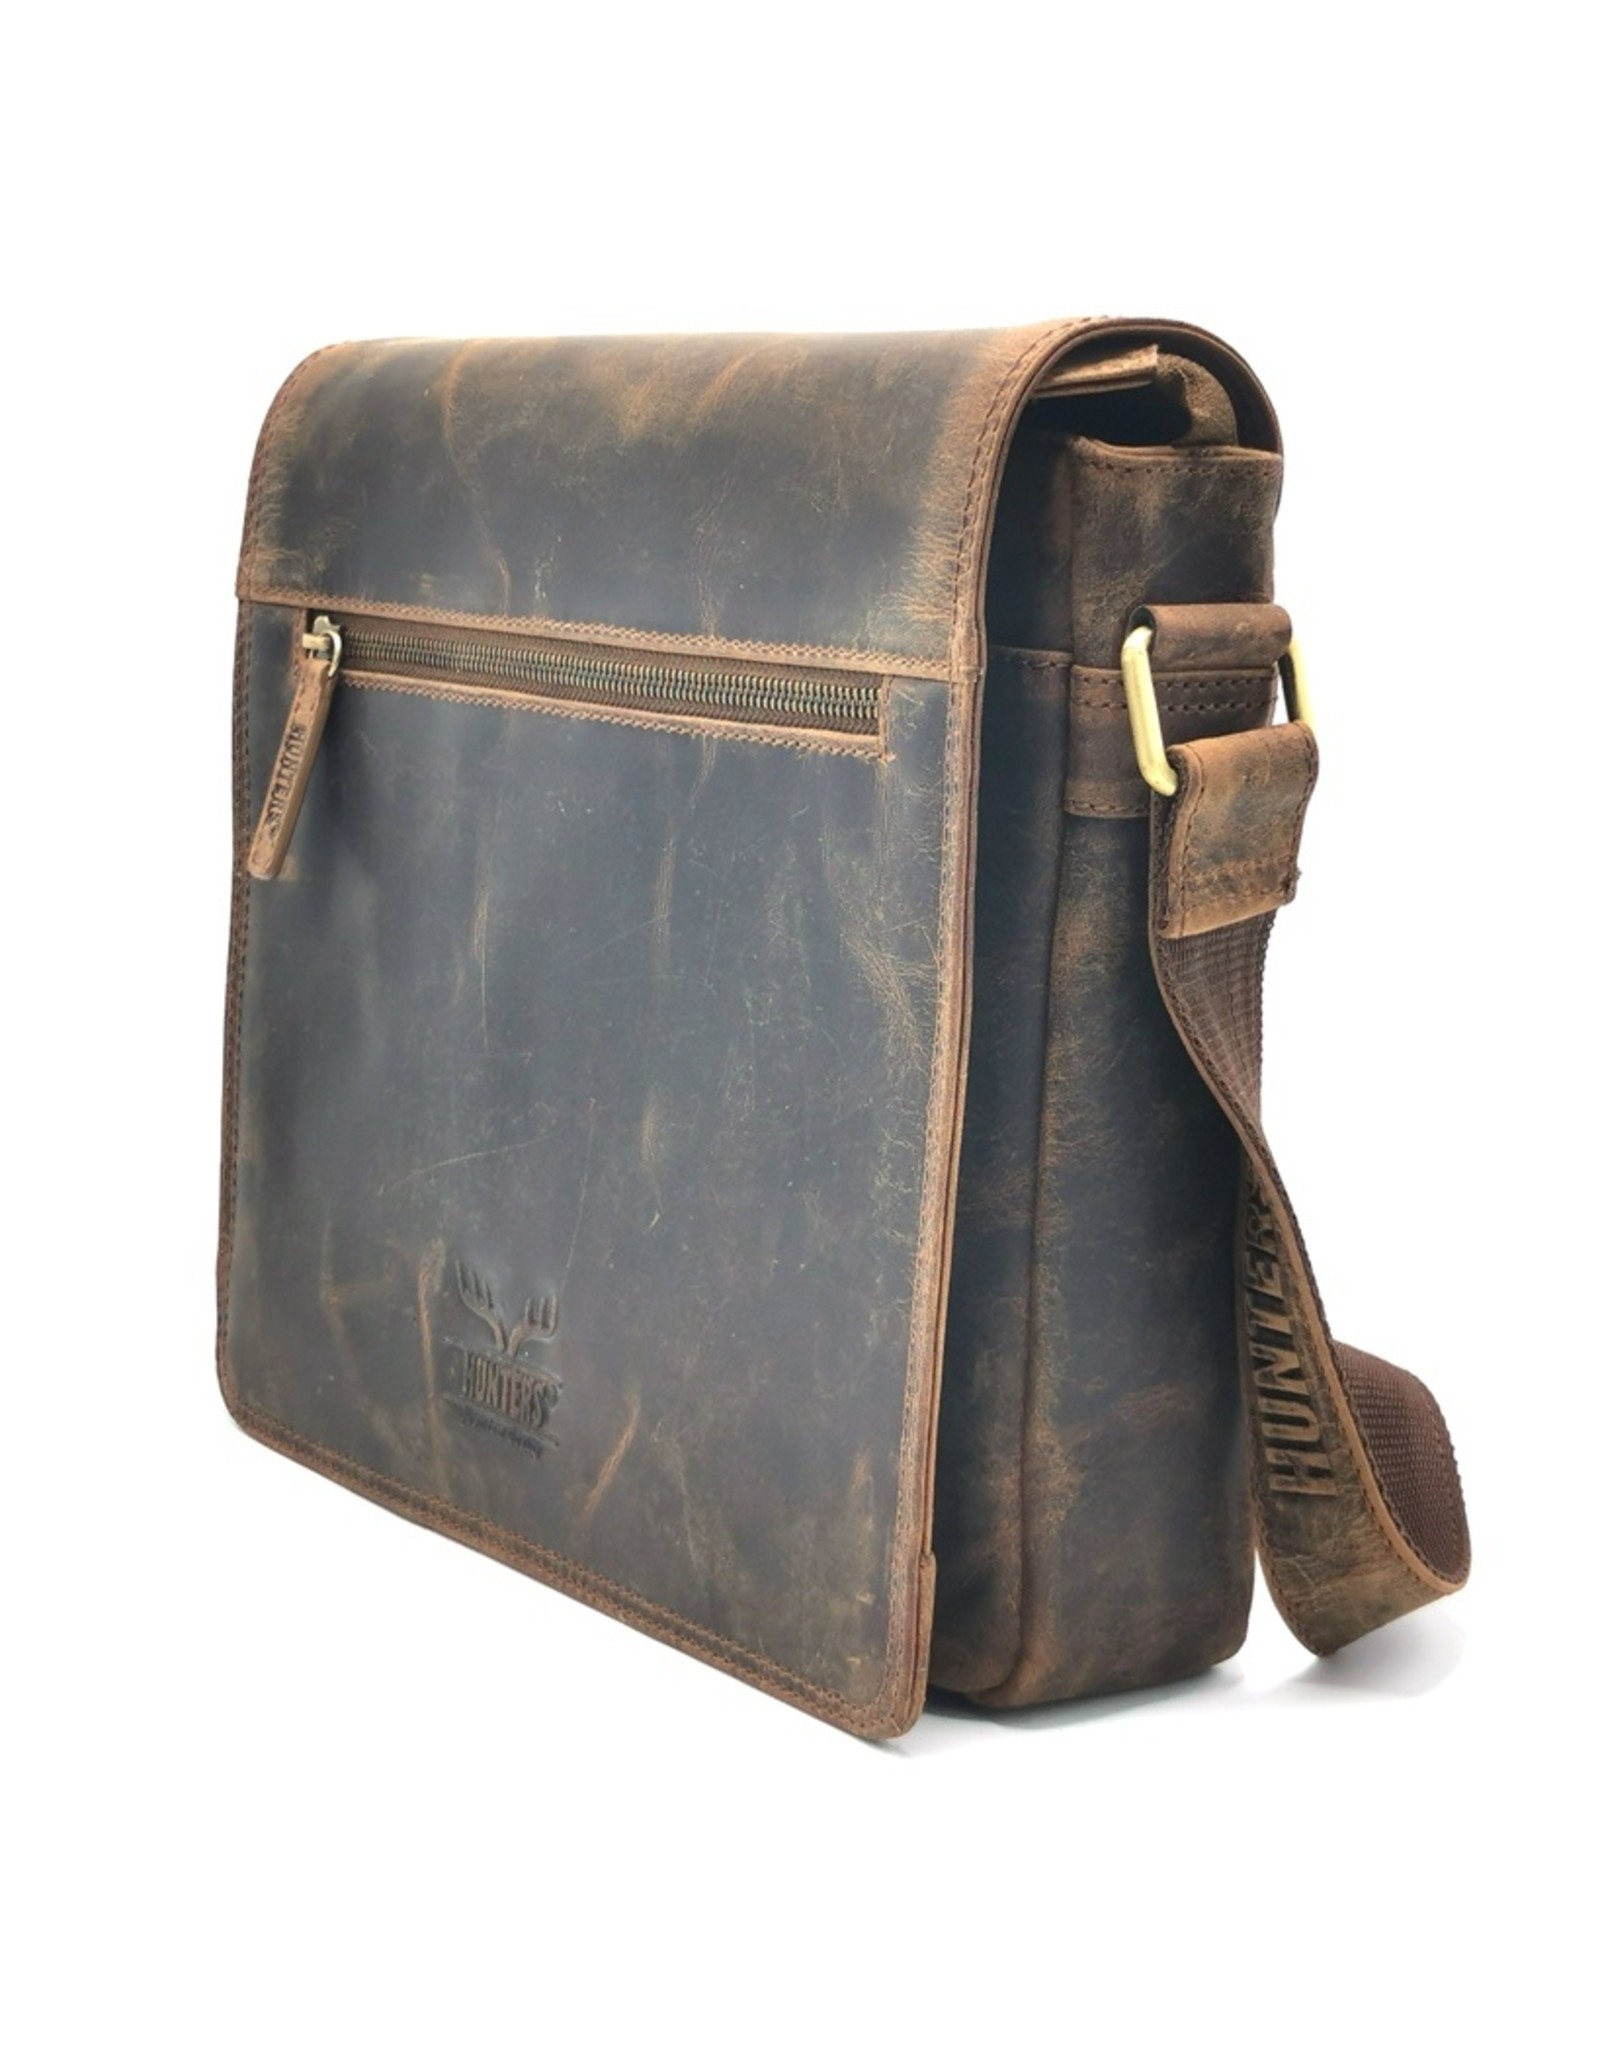 Hunters Leather Workbags and Leather Laptop Bags - Hunters Messenger bag with cover Buffalo leather